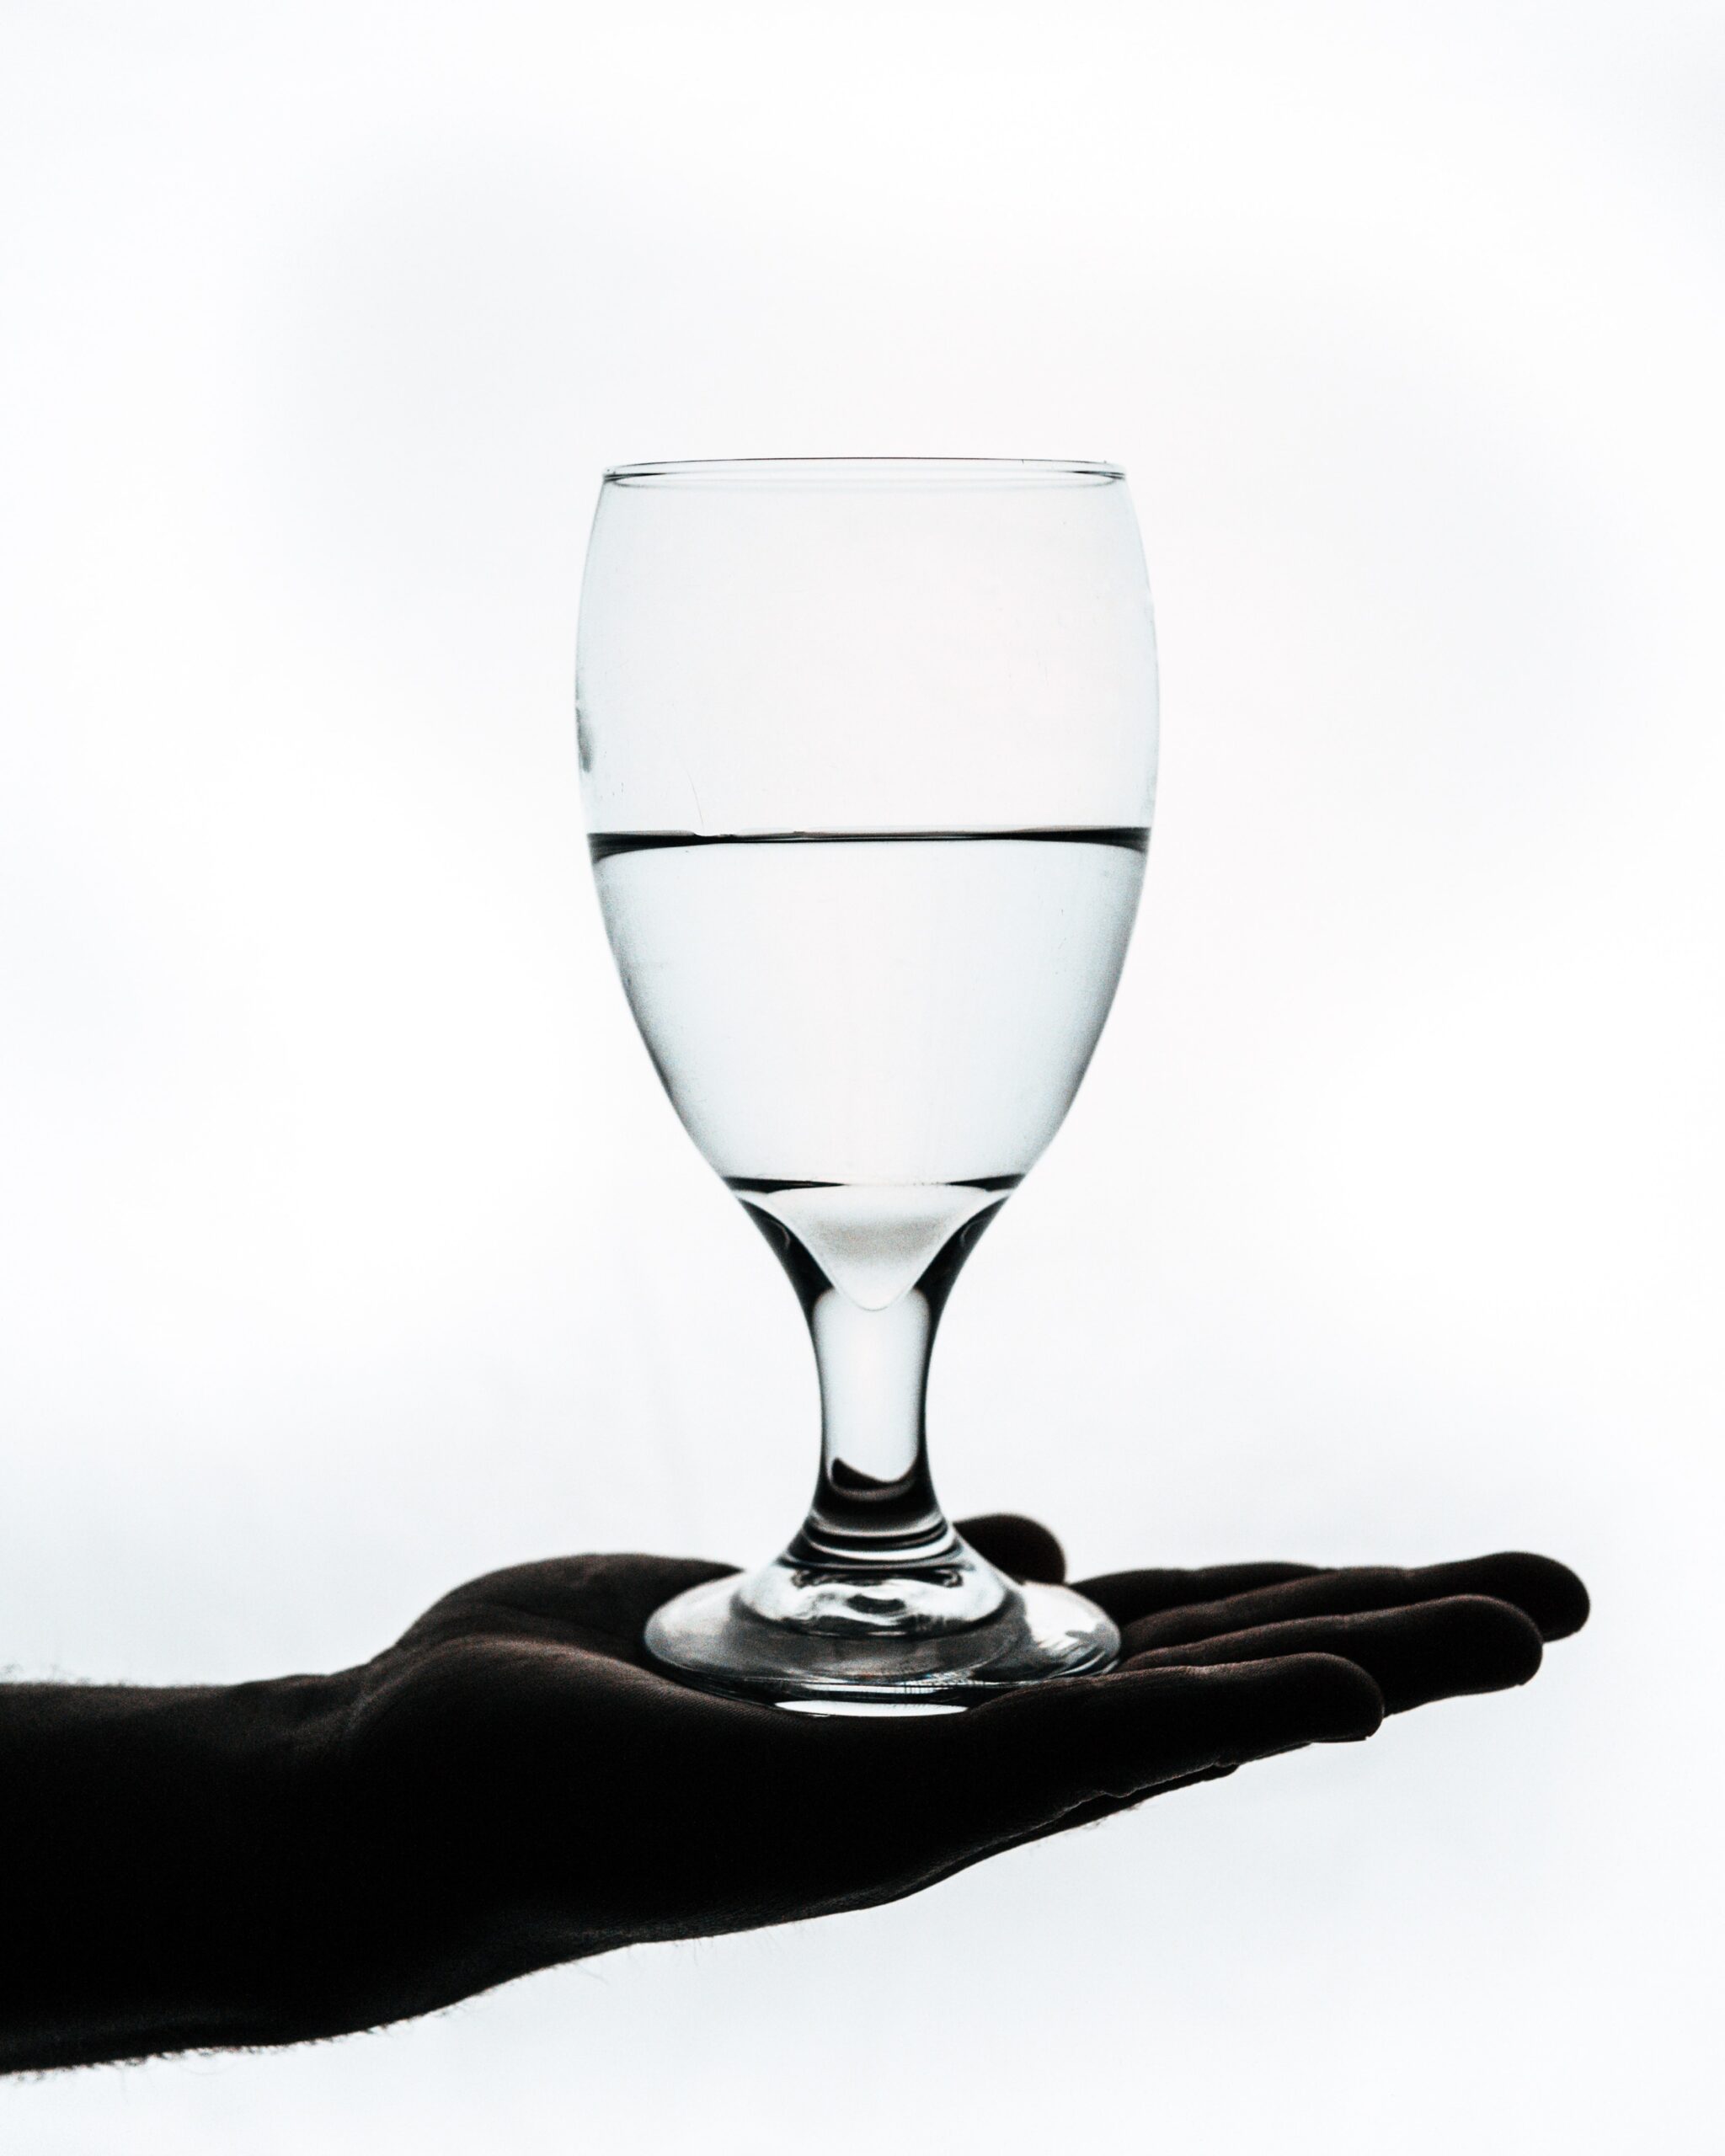 A wine glass full of water is held in the palm of a hand.